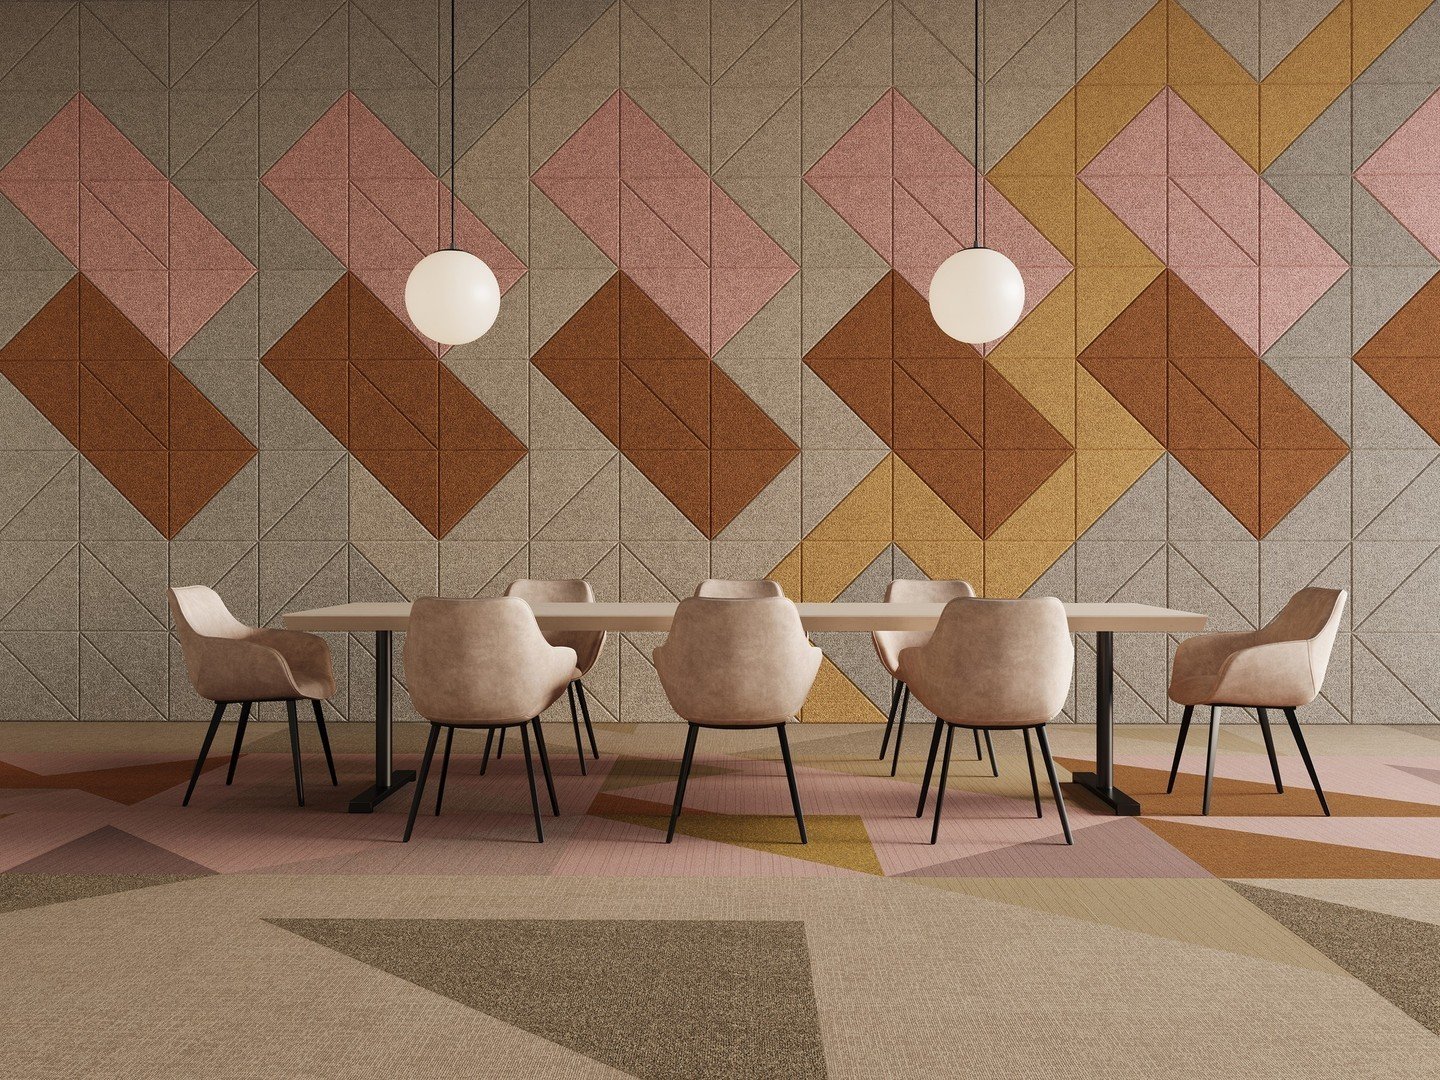 Baux Acoustics and Tarkett Flooring have collaborated to create a new synchronised colour palette for designing healthier interiors from ceiling to floor.⁠
⁠
Follow the link to learn more about the collaboration.⁠
⁠
Images courtesy of @bauxdesign fea